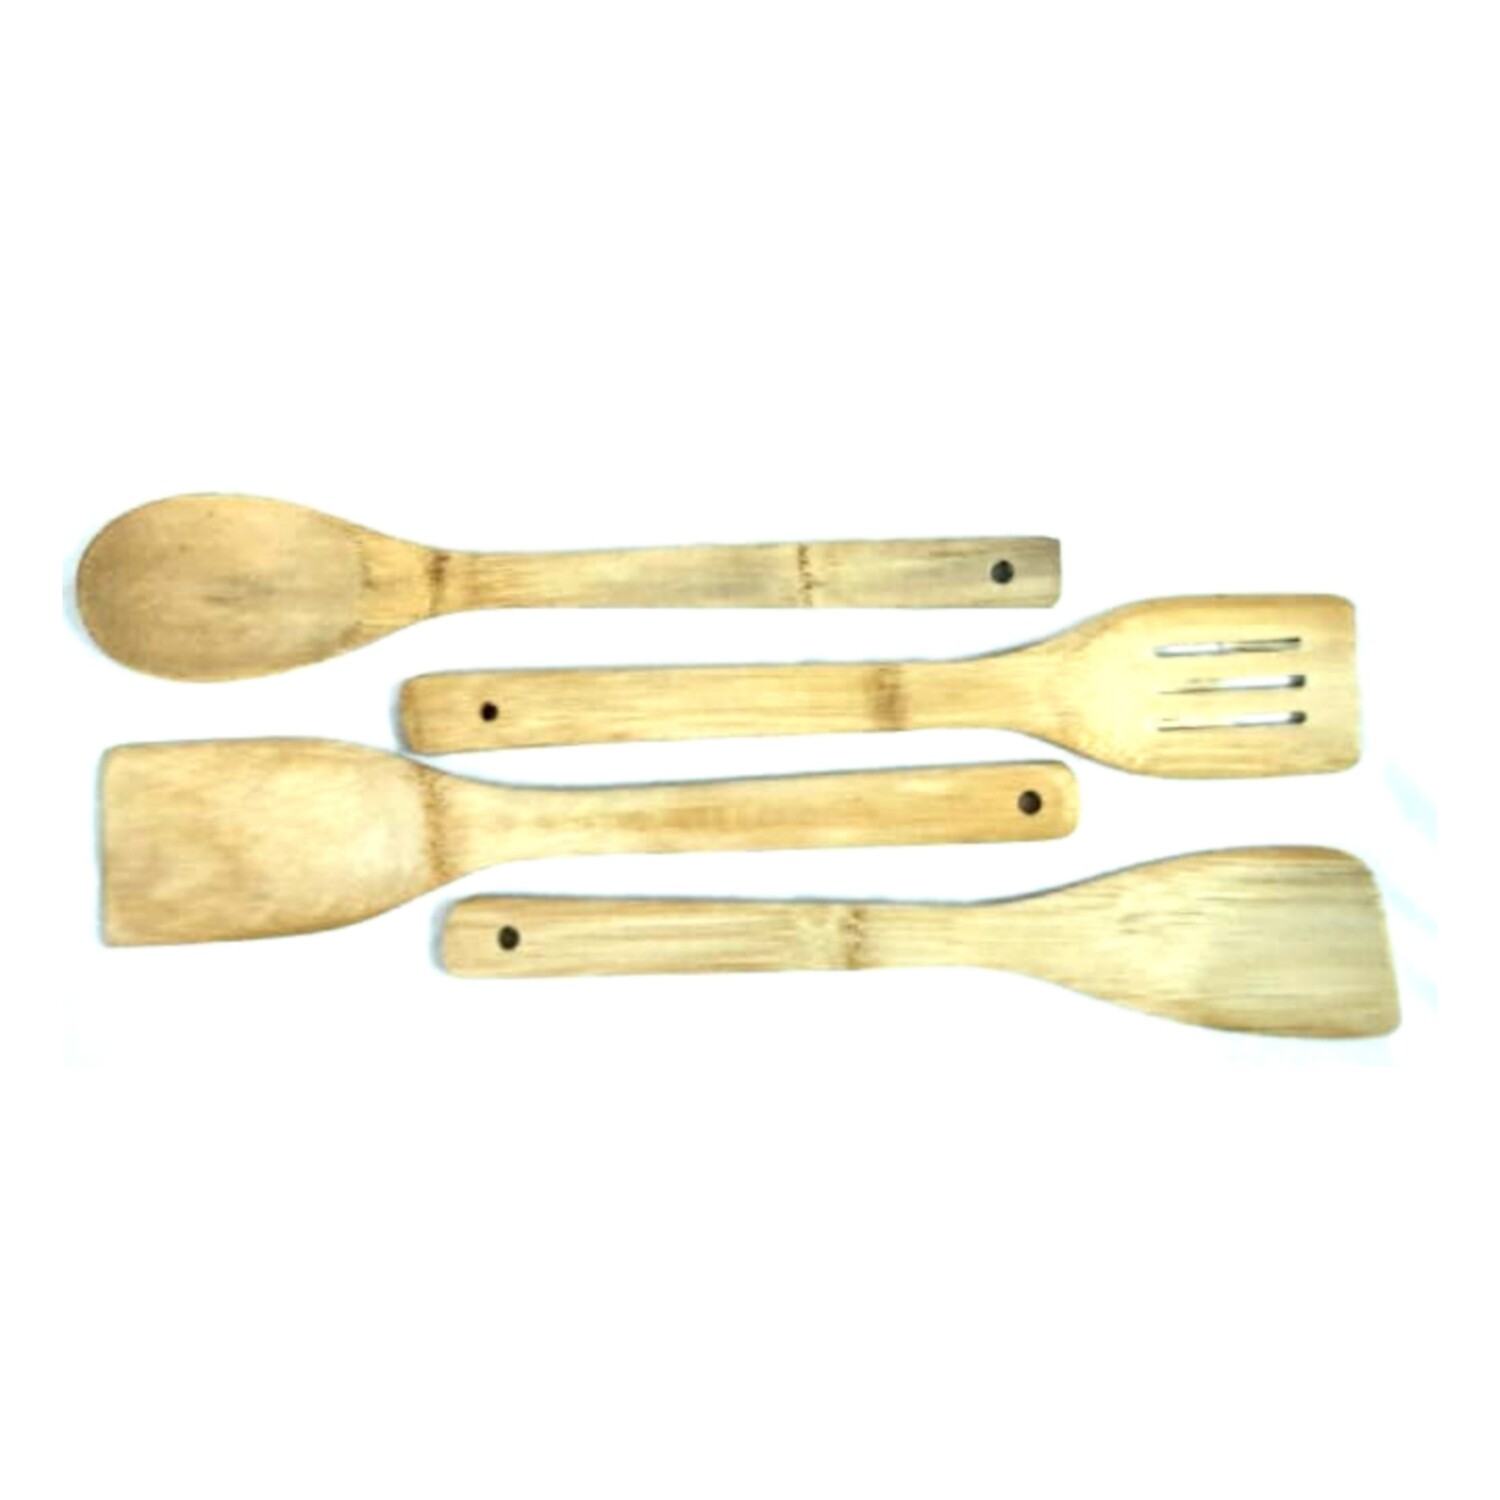 Bamboo Kitchen Tools/Wooden Spatulas - 4Pieces - Pack of 1